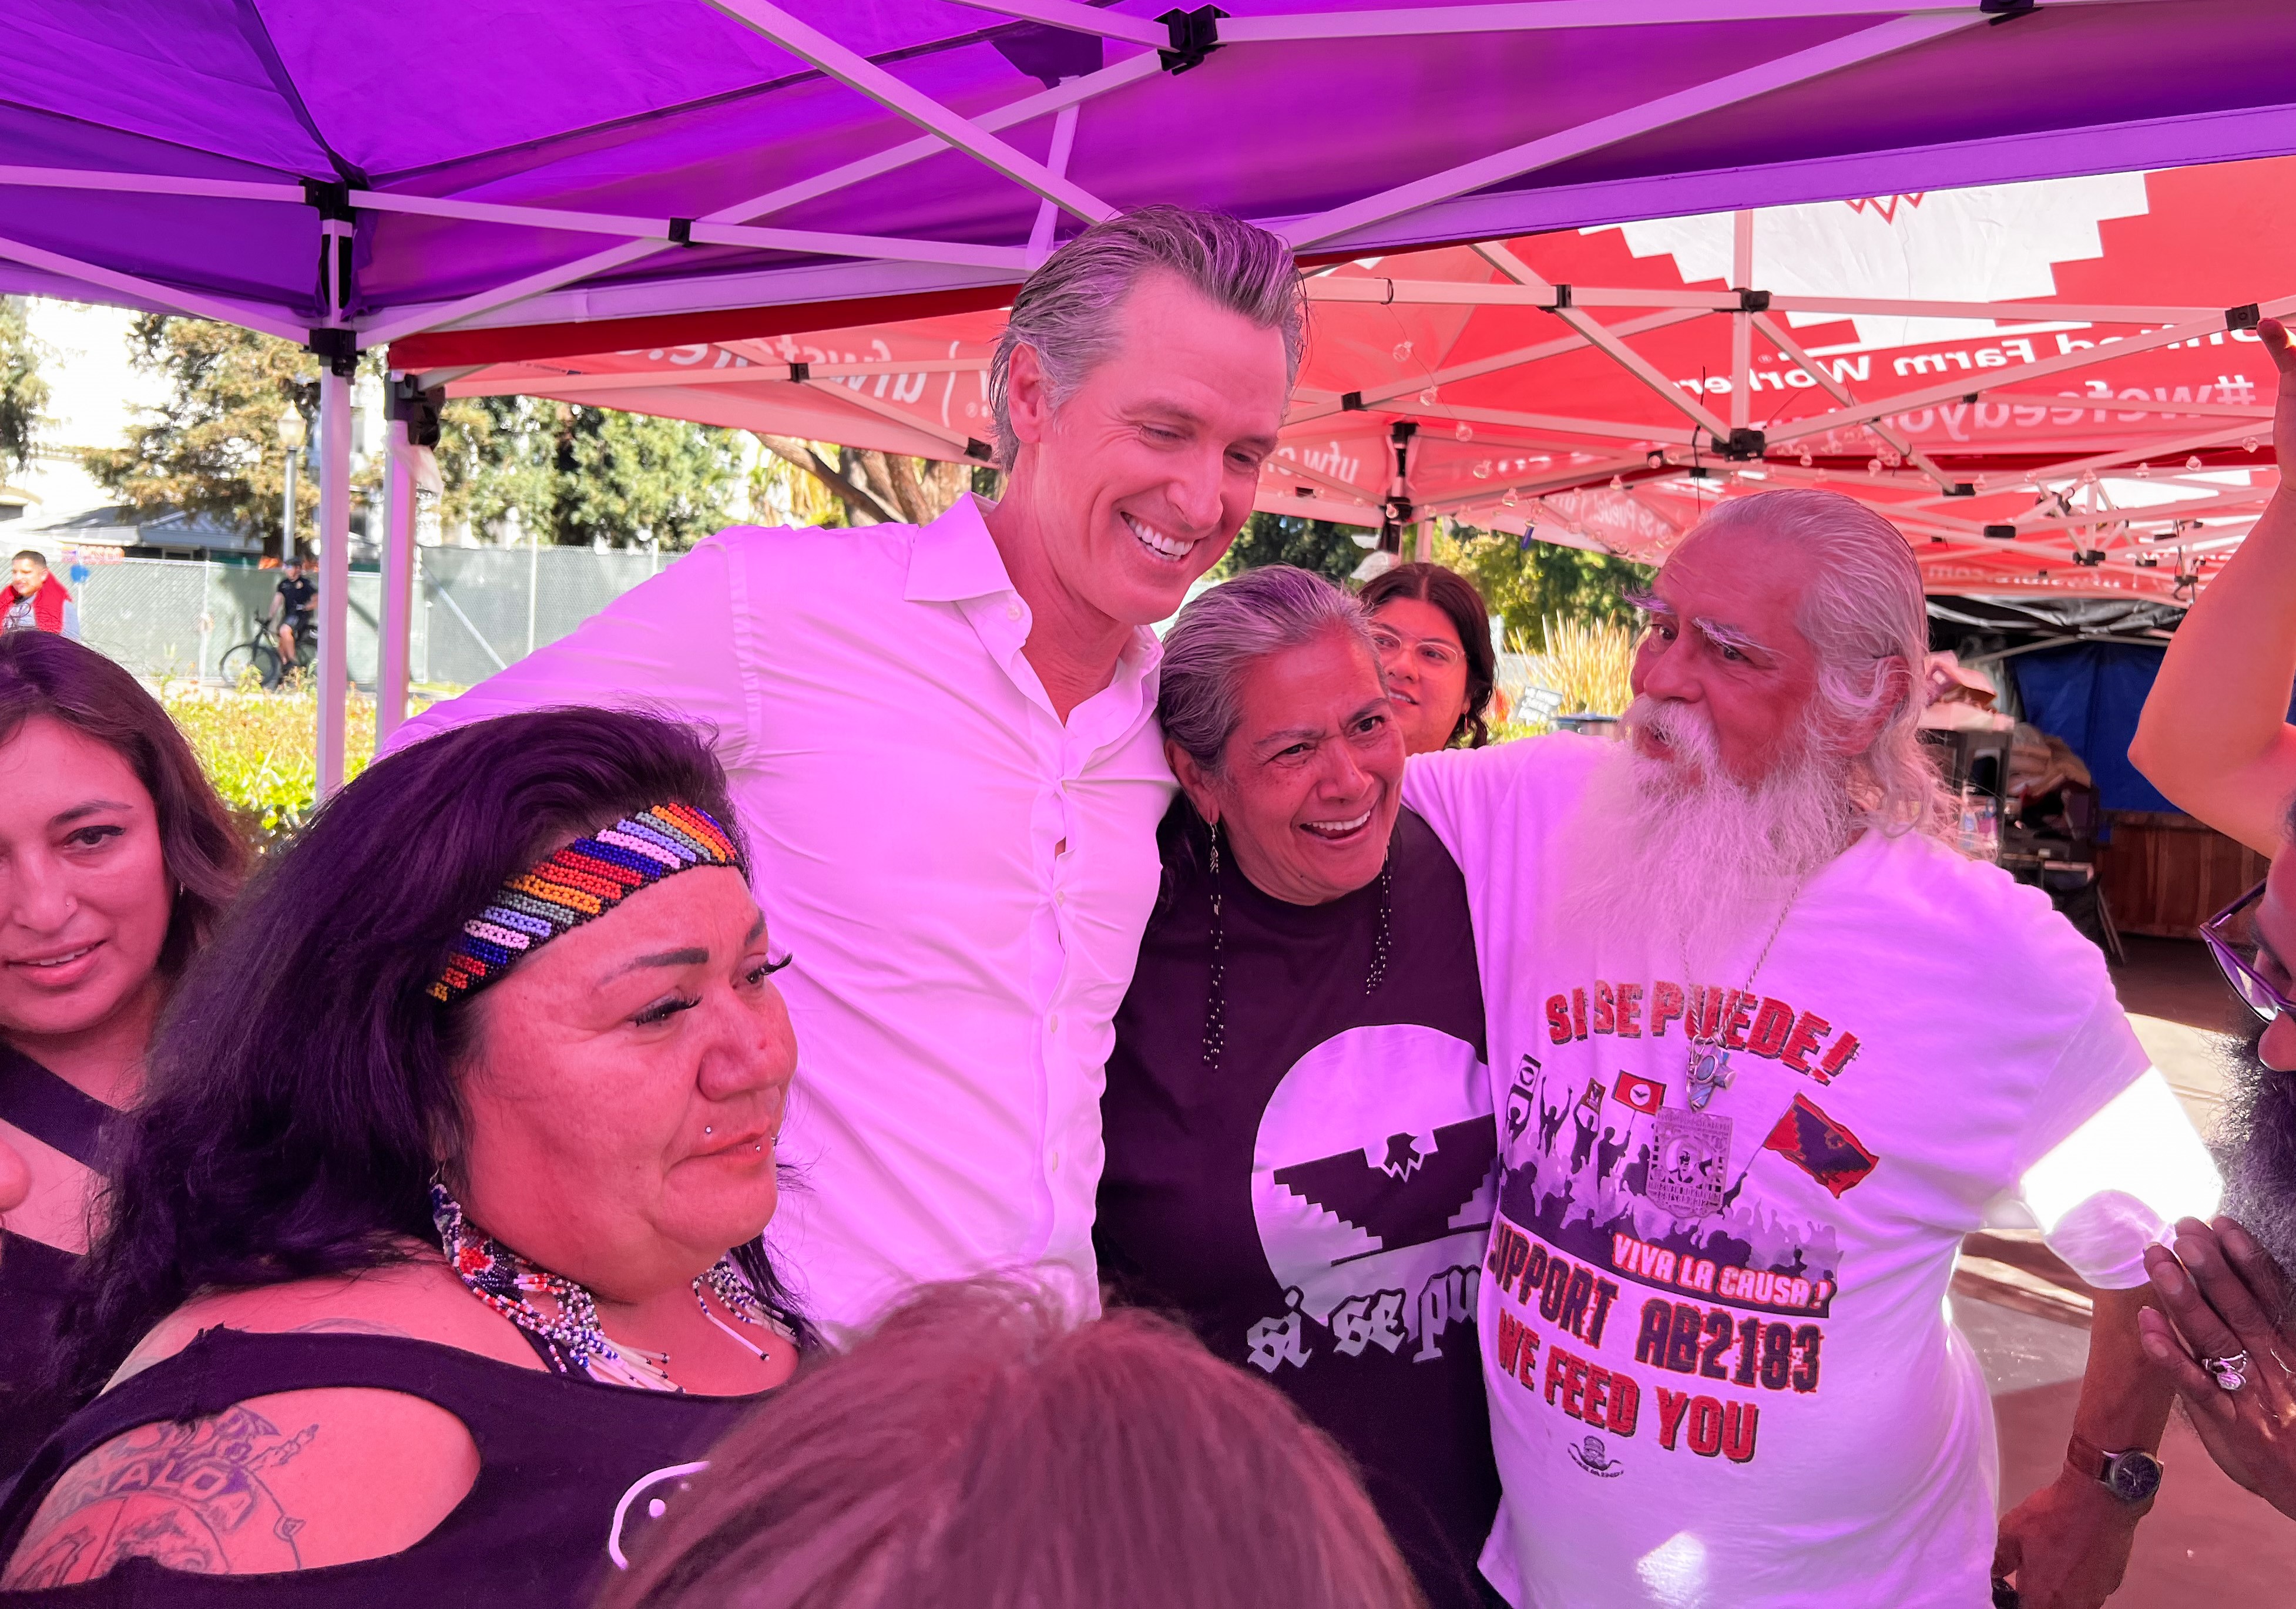 Alongside Farmworkers at the State Capitol, Governor Newsom Signs Law Expanding Farmworker Union Rights